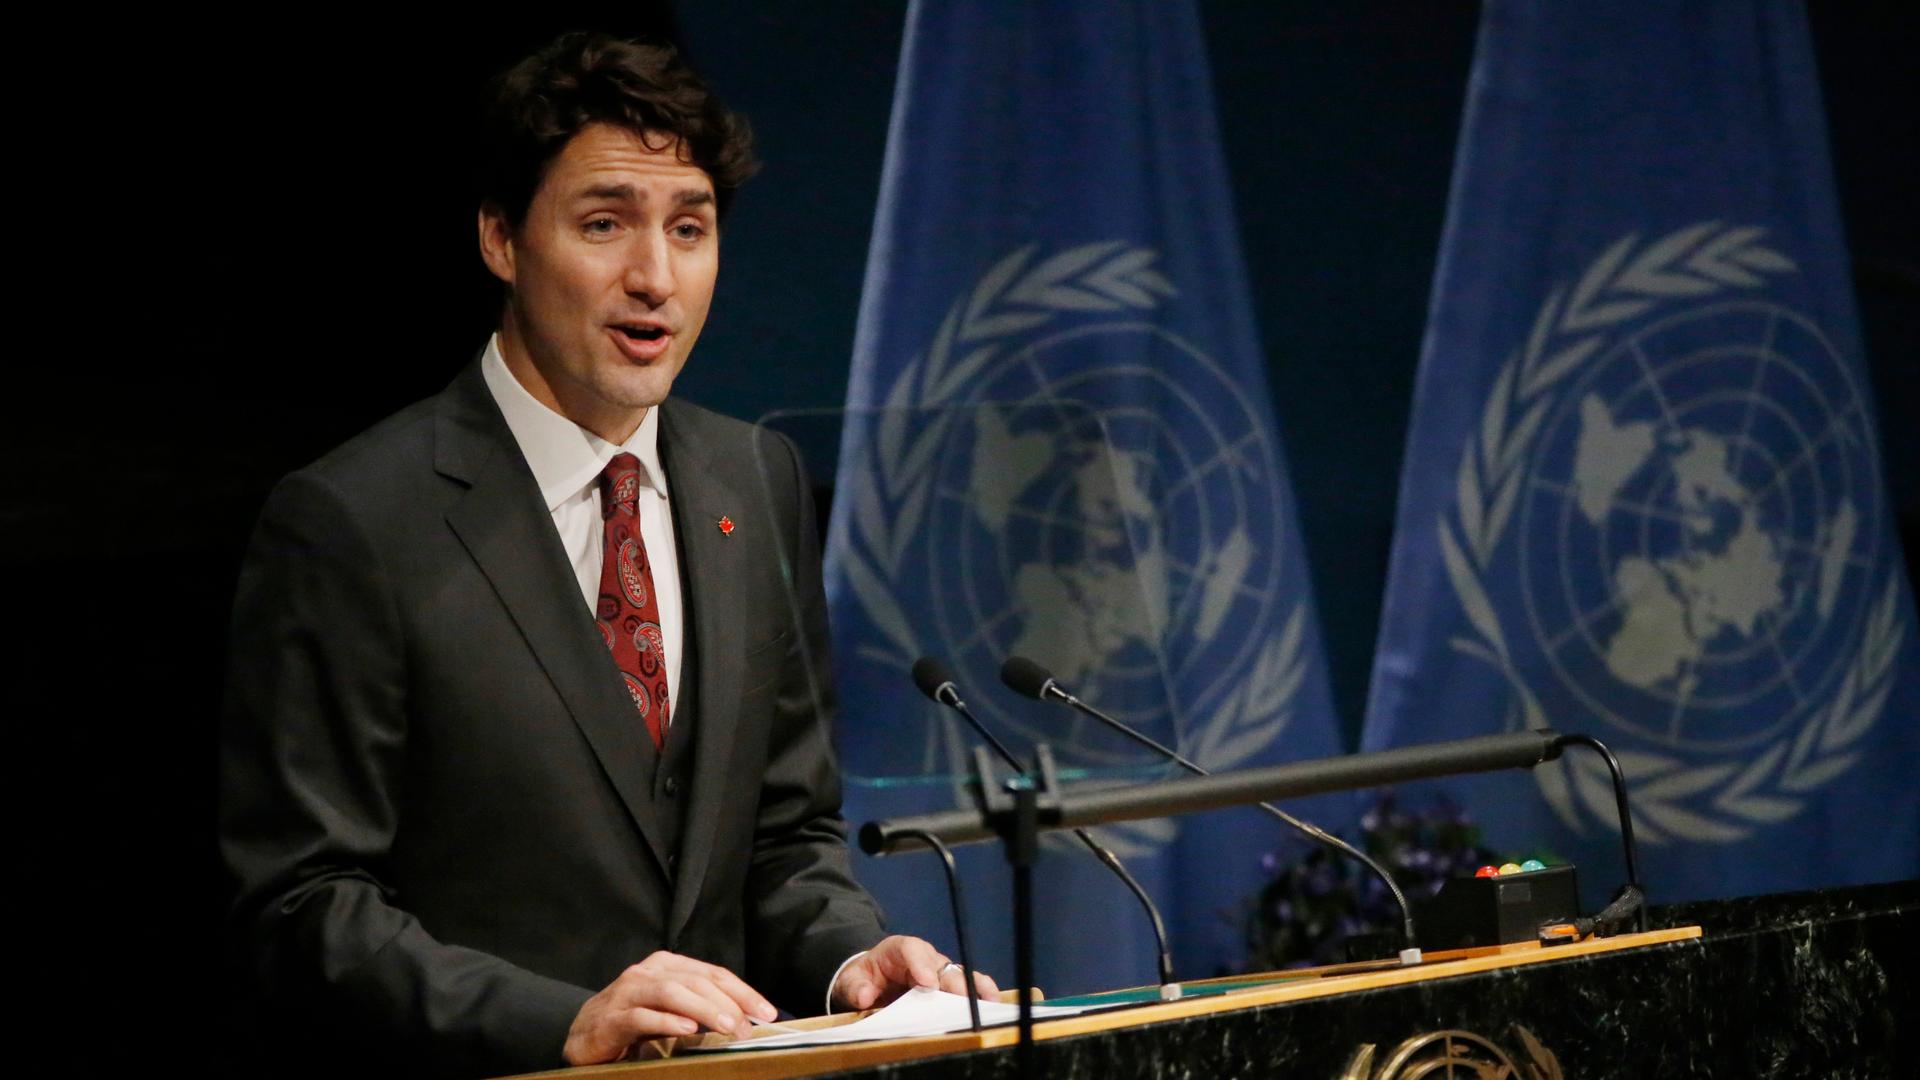 Canadian Prime Minister Justin Trudeau speaking at the signing ceremony on climate change at the UN in 2016. Trudeau has committed Canada to steep reductions in carbon pollution, while also pushing to expand tar sands oil production.